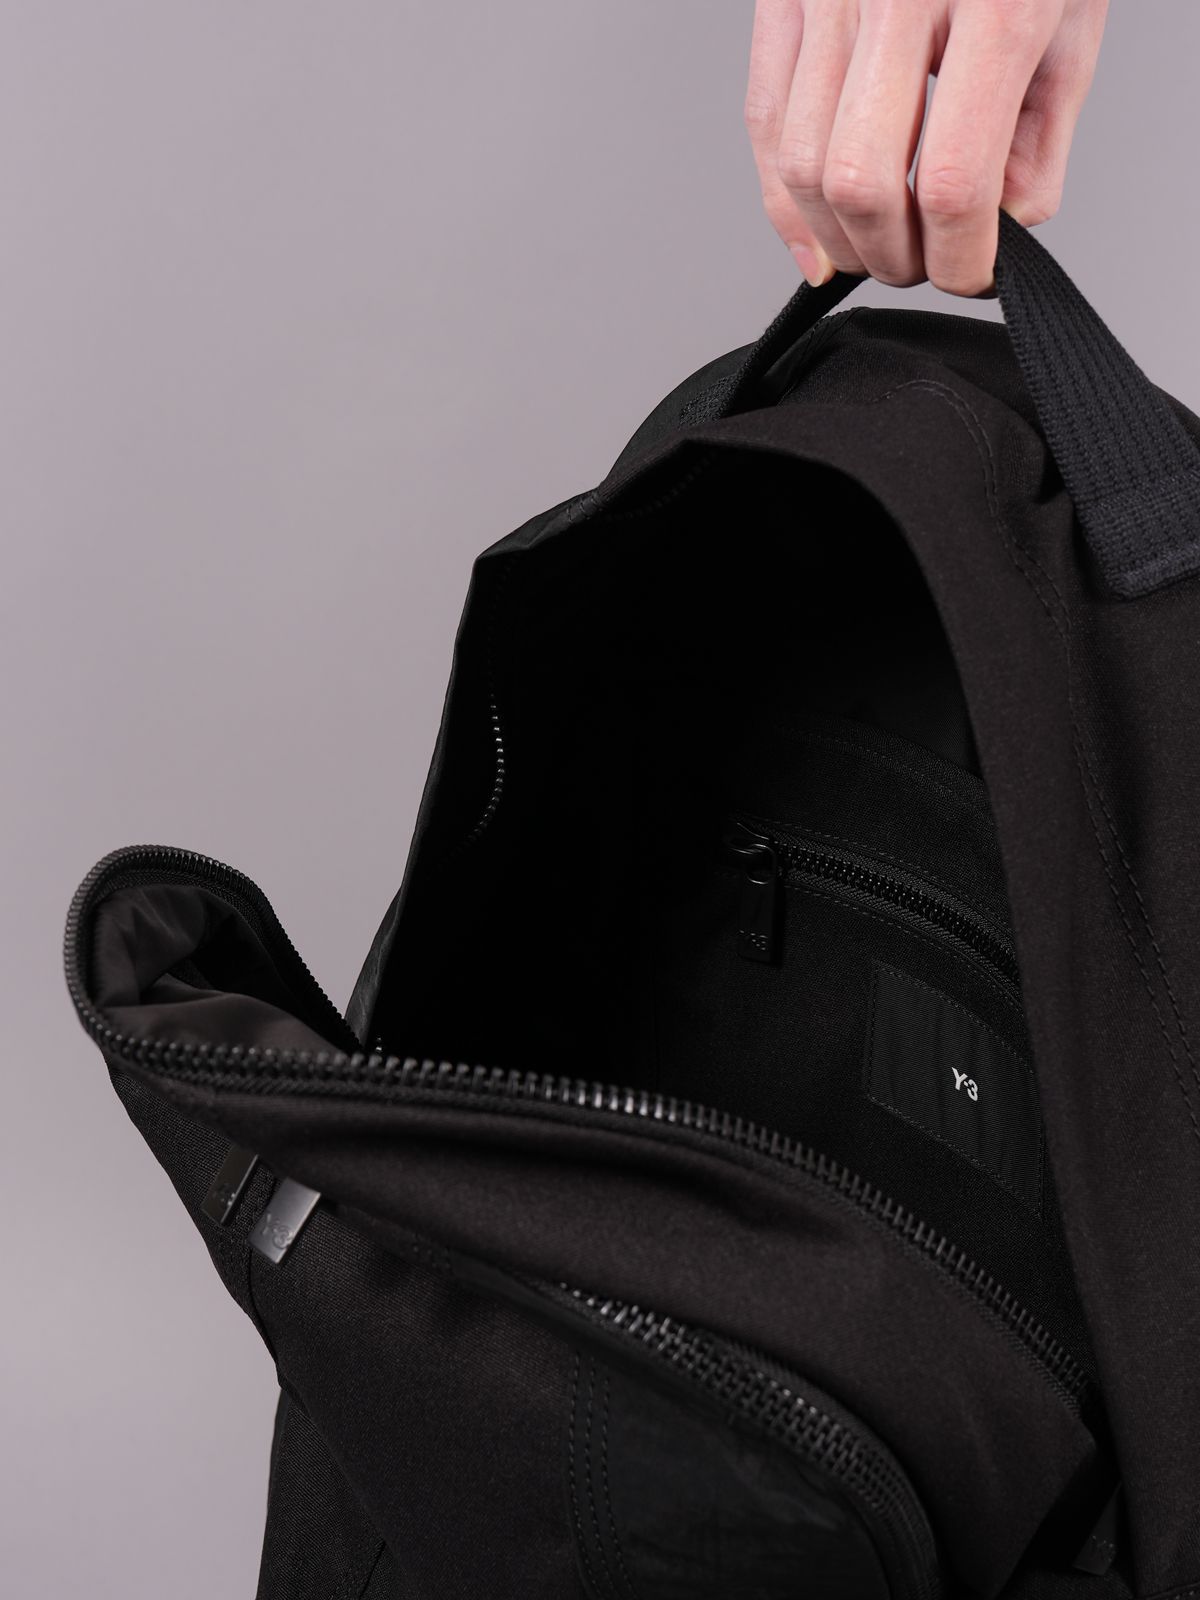 Y-3 - 【ラスト1点】 Y-3 CLASSIC BACKPACK / ワイスリー クラシック